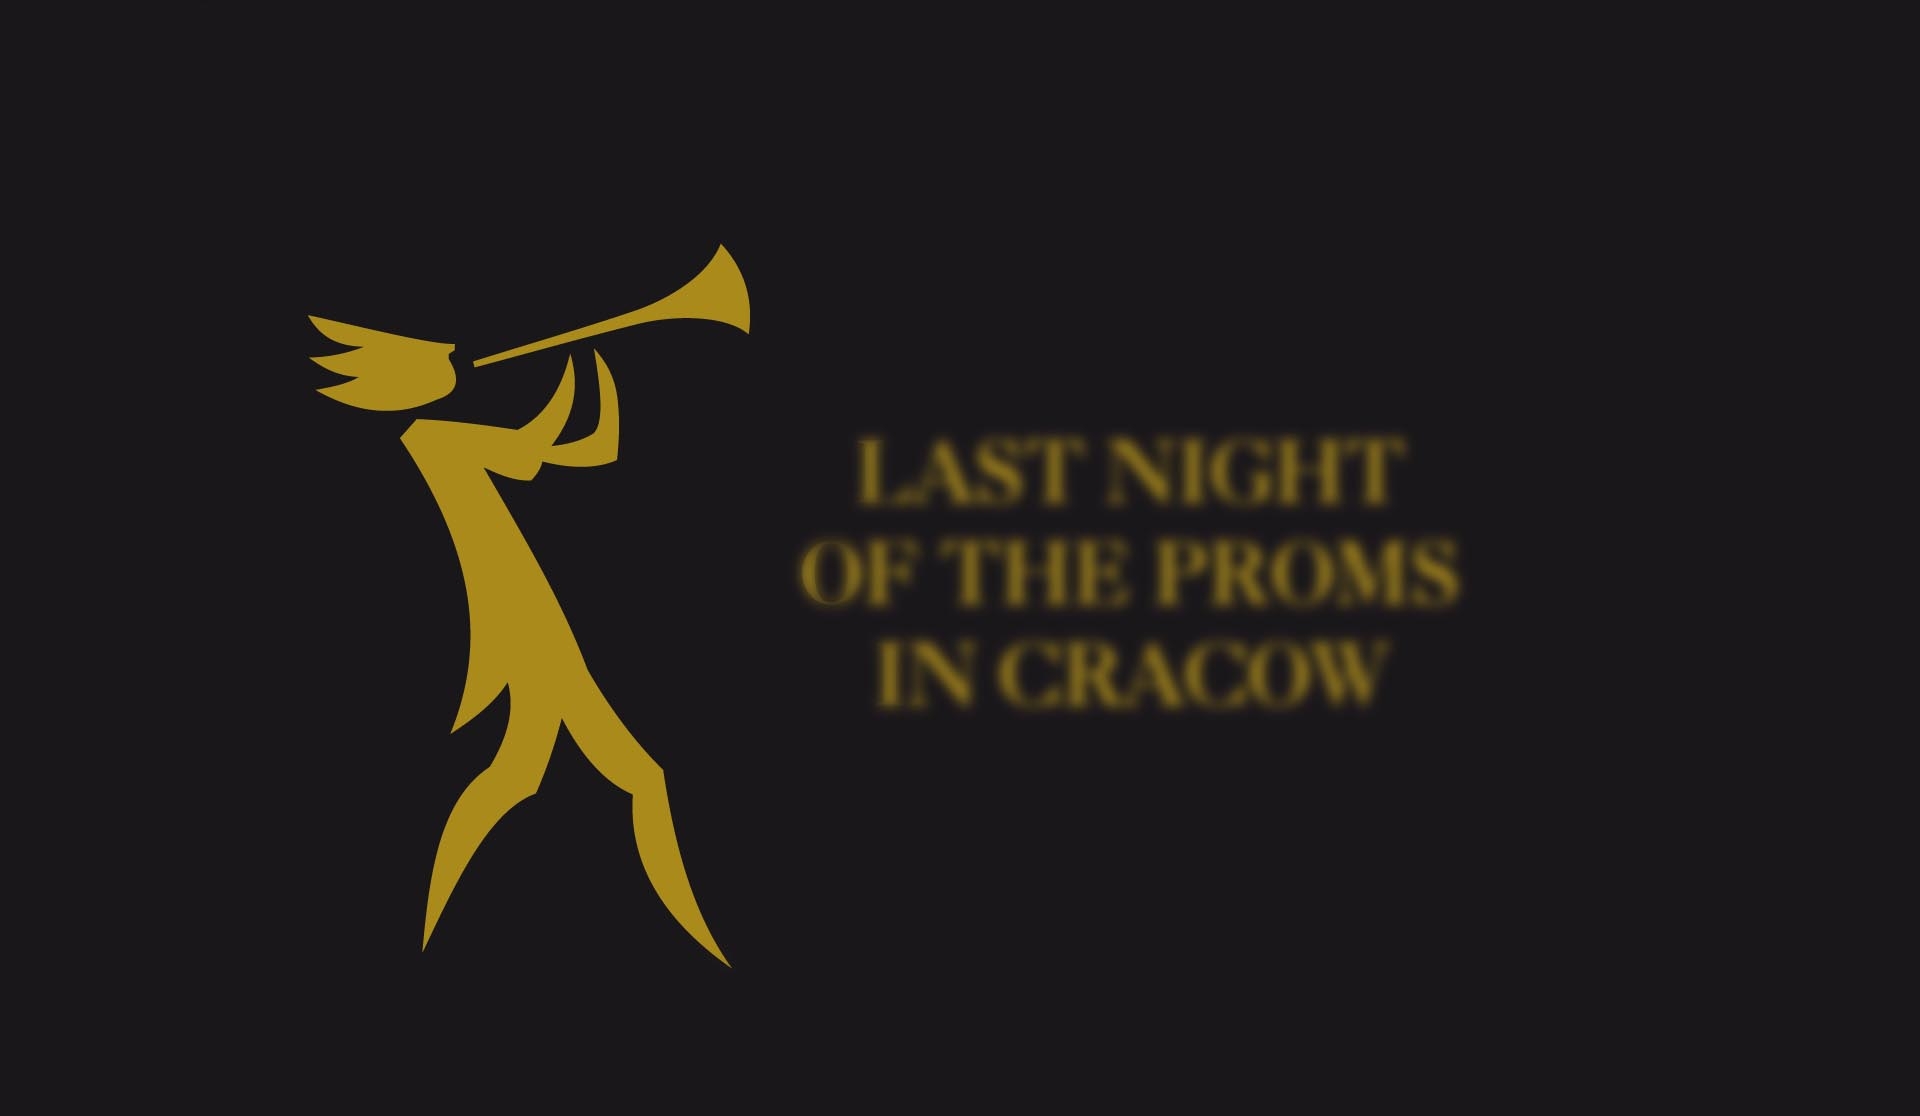 15.09.2018 – Last Night of the Proms in Cracow